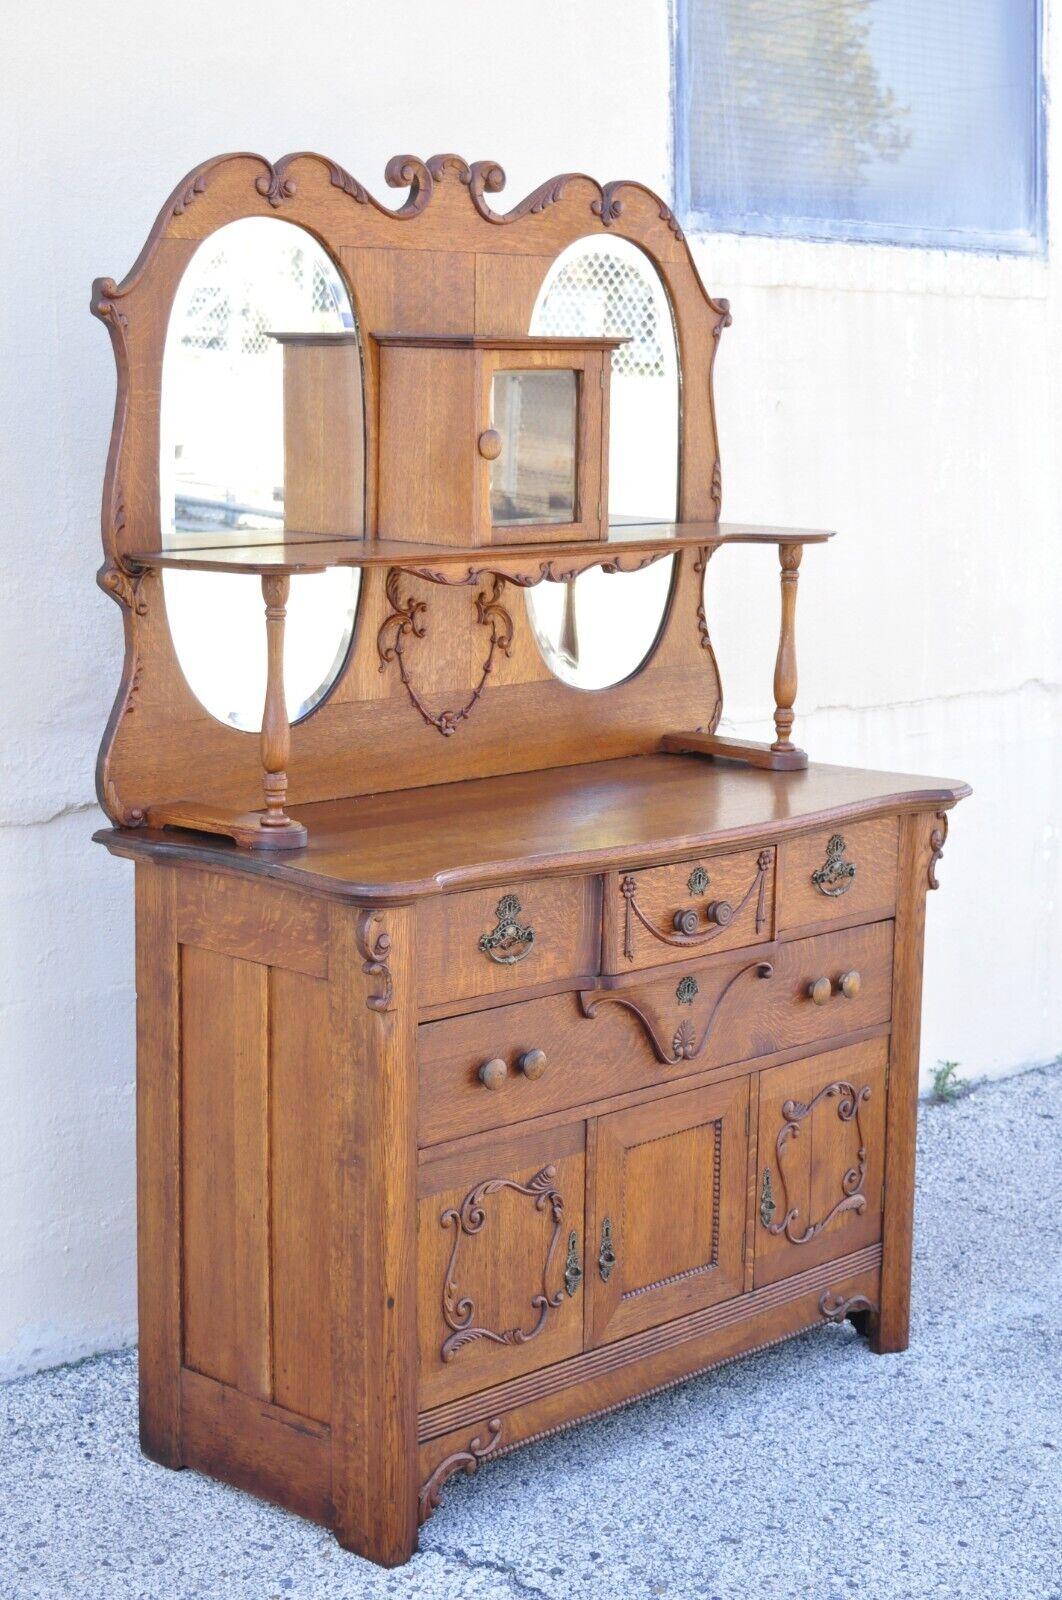 Antique Victorian Olbrich and Goldbeck oak wood buffet sideboard cabinet with mirror. Item features (2) Oval beveled glass mirrors, upper shelf with small swing door, carved drape accents, 2 part construction, 3 swing doors, original label, 4